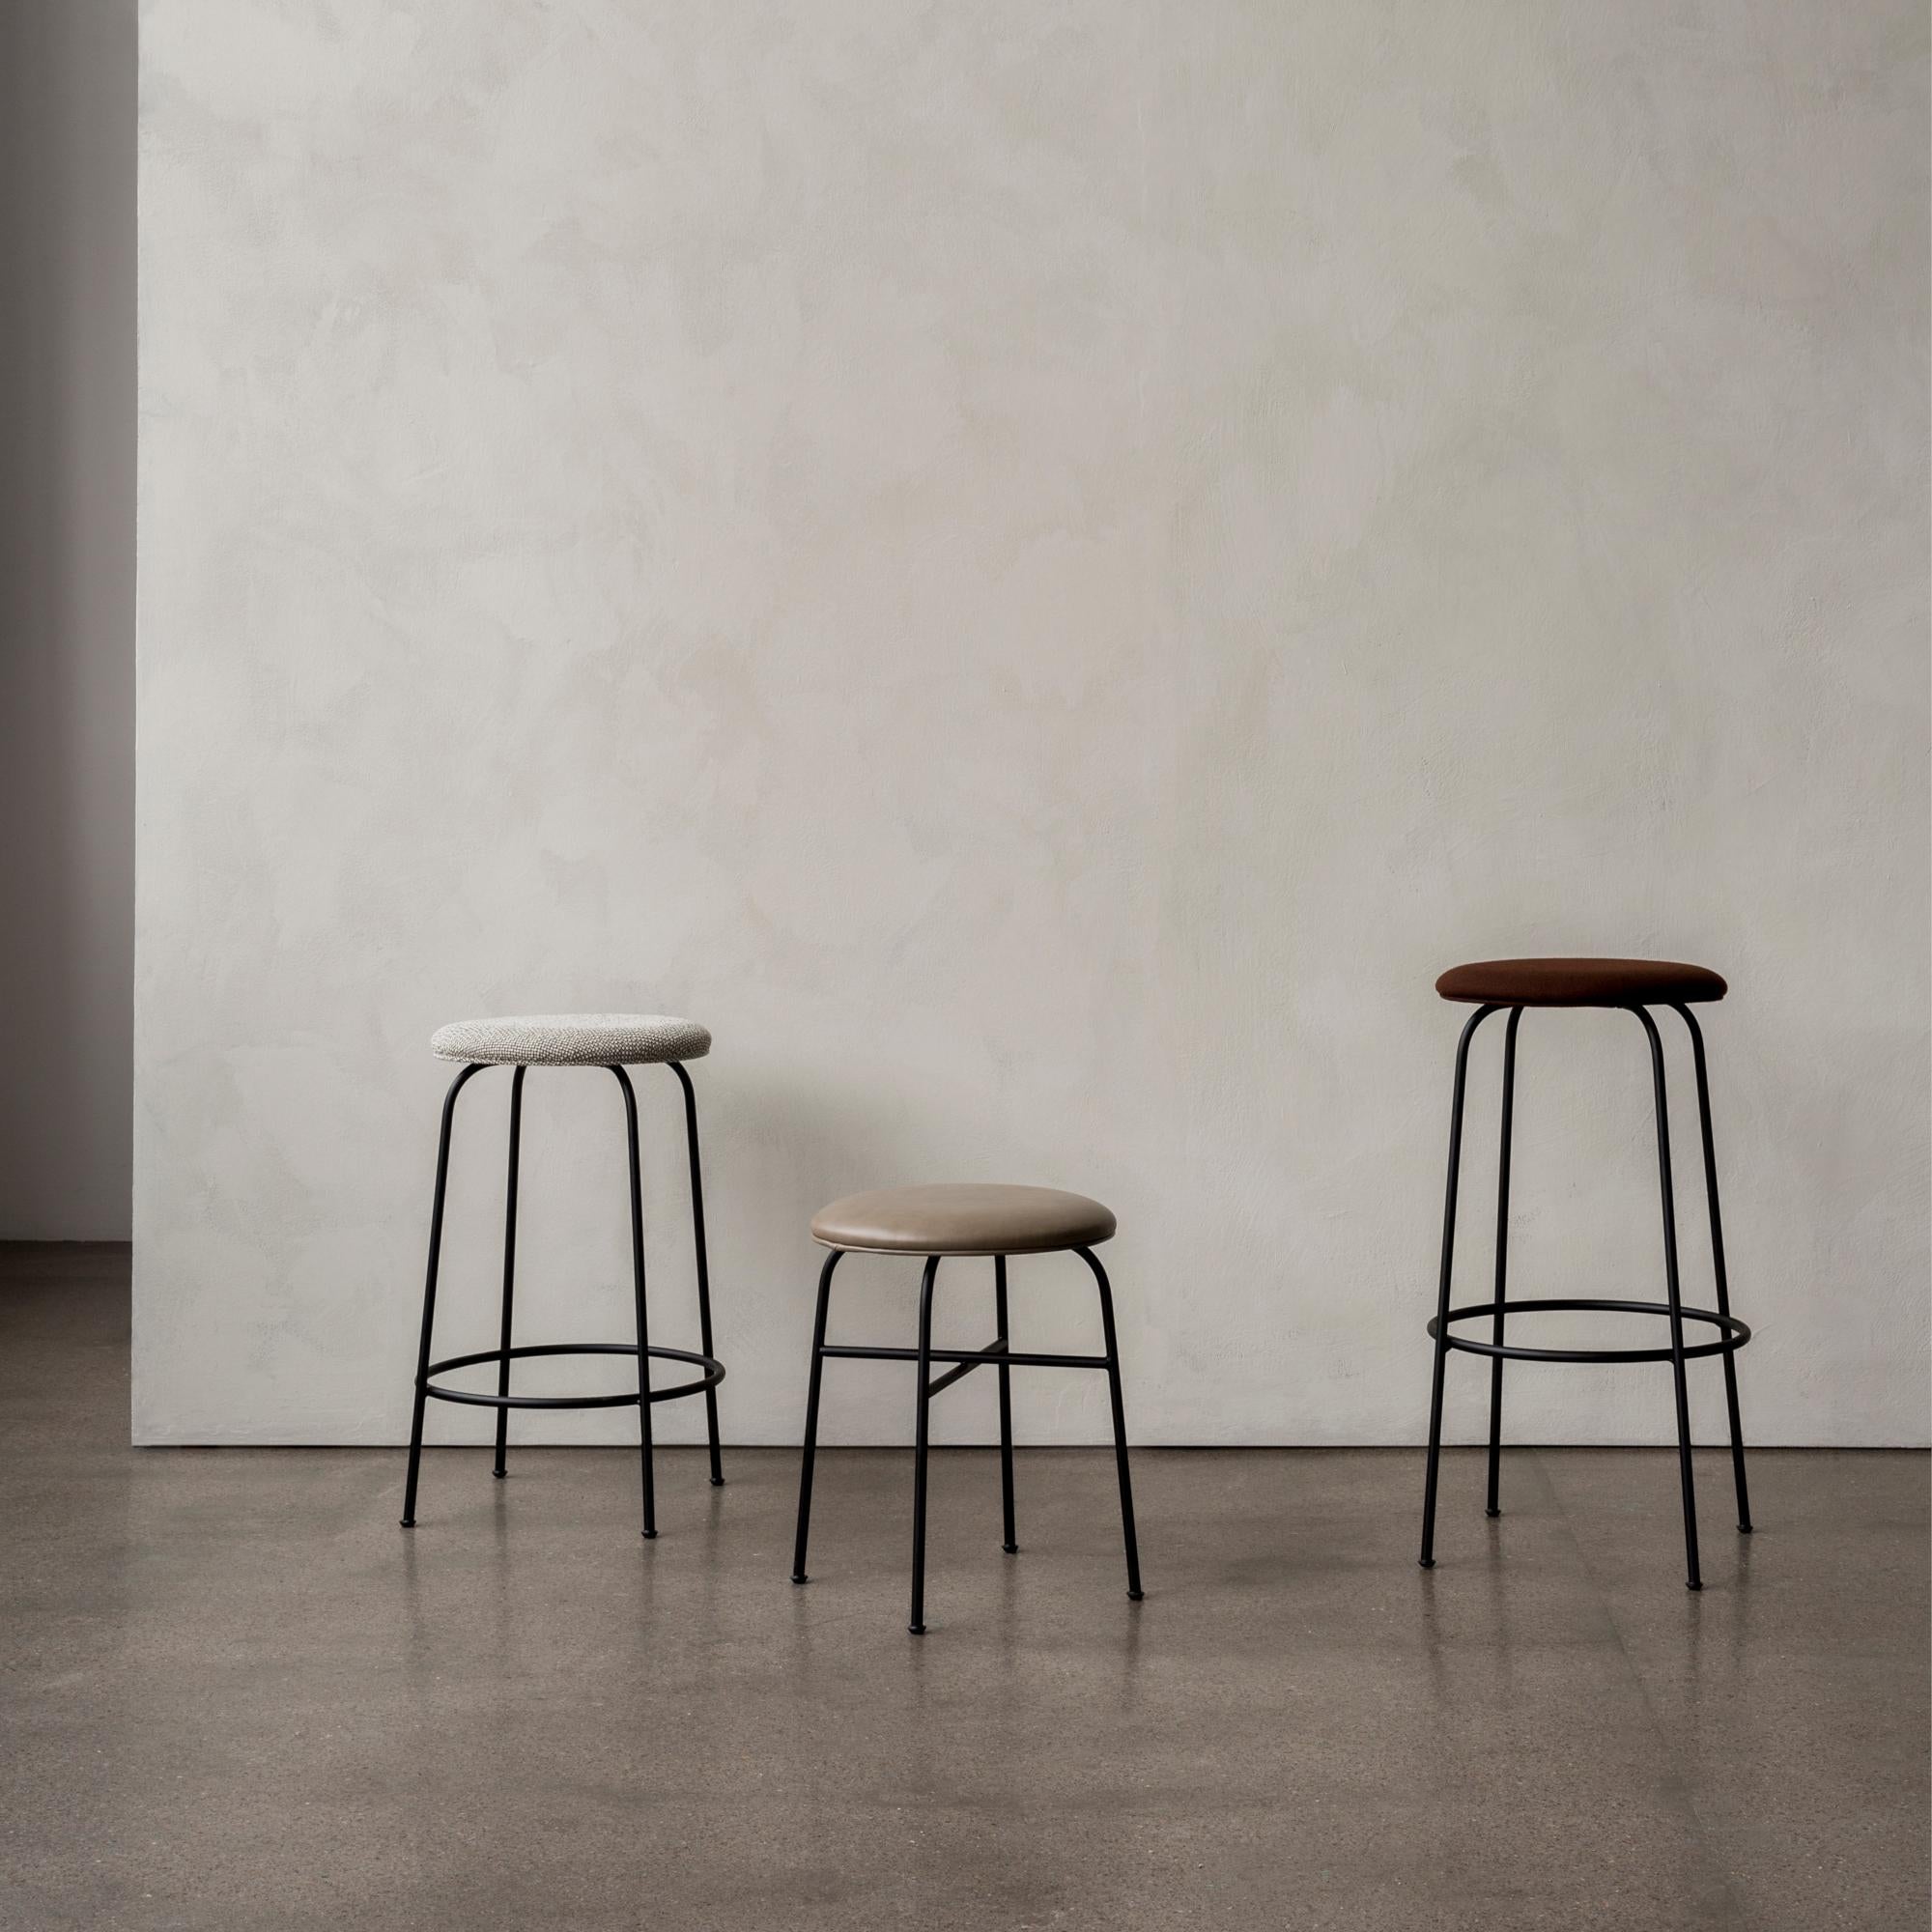 Scandinavian Modern Afteroom Stool, Pitch Black Leather Seat and Black Steel Legs